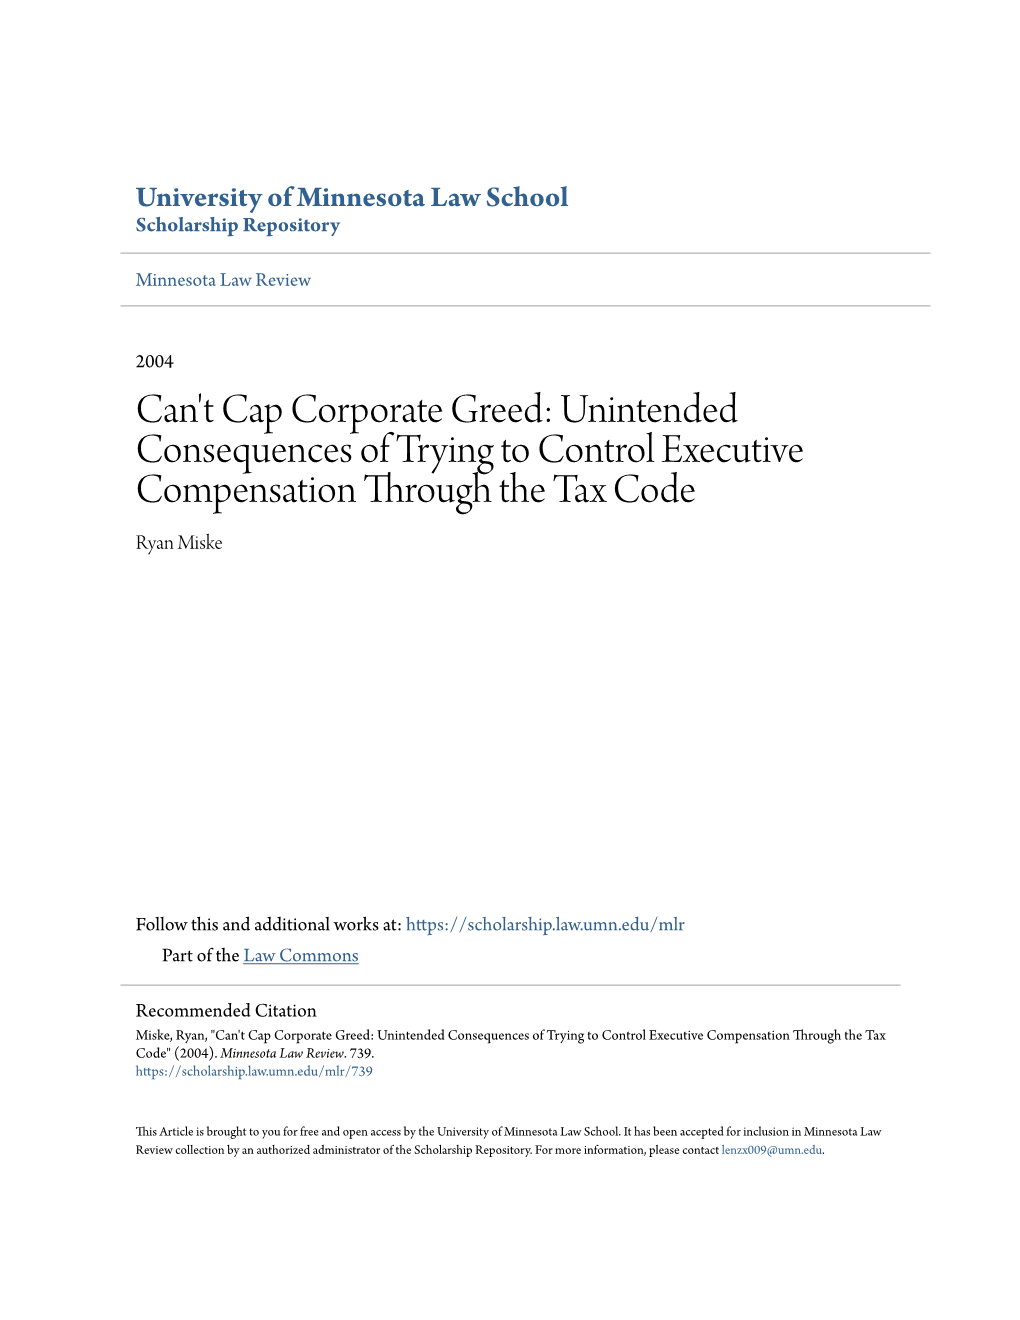 Can't Cap Corporate Greed: Unintended Consequences of Trying to Control Executive Compensation Through the Tax Code Ryan Miske